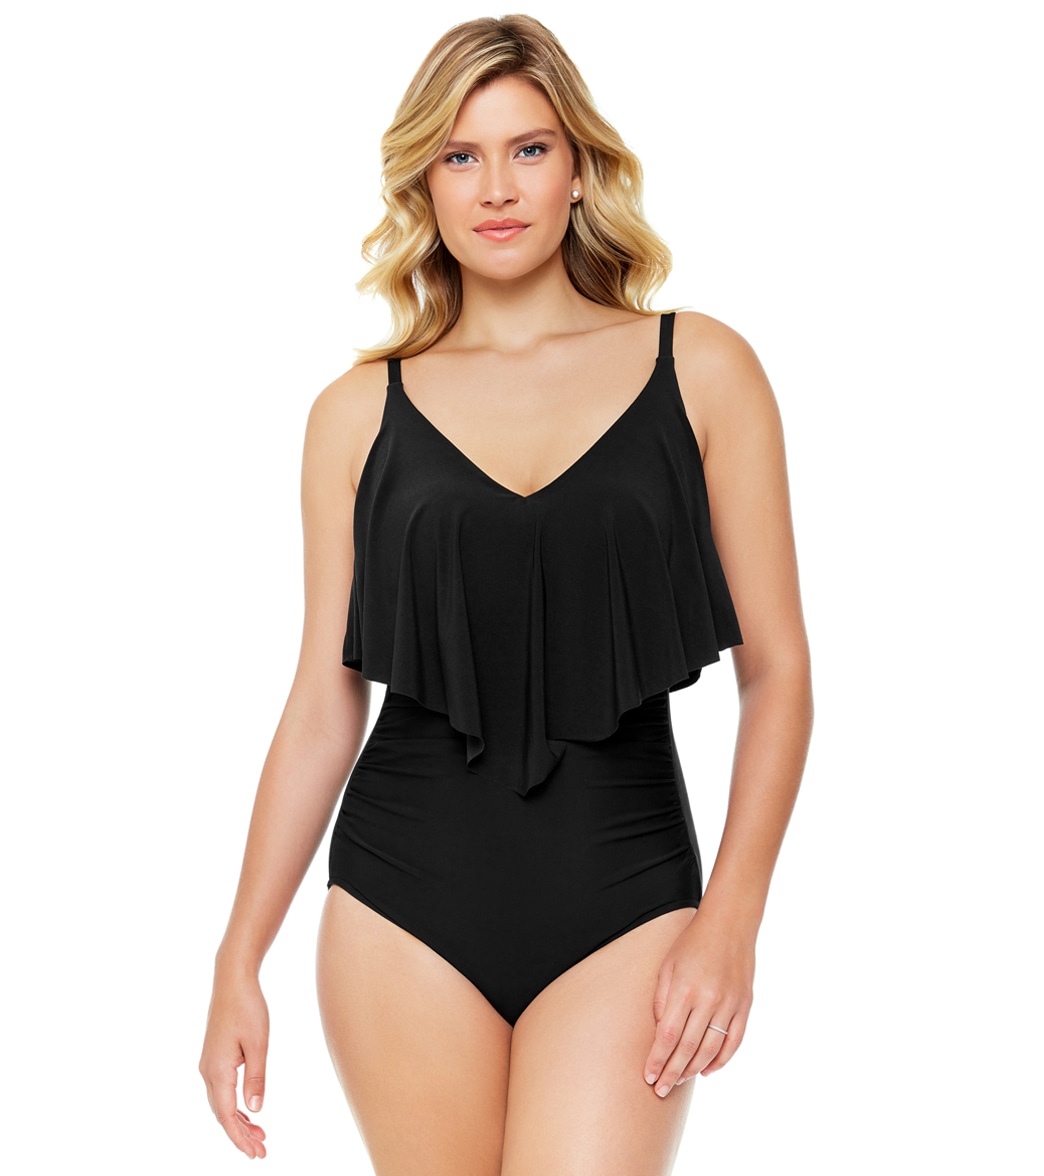 Penbrooke Solid Bringing Sexy V Neck Ruffle One Piece Swimsuit - Black 8 - Swimoutlet.com